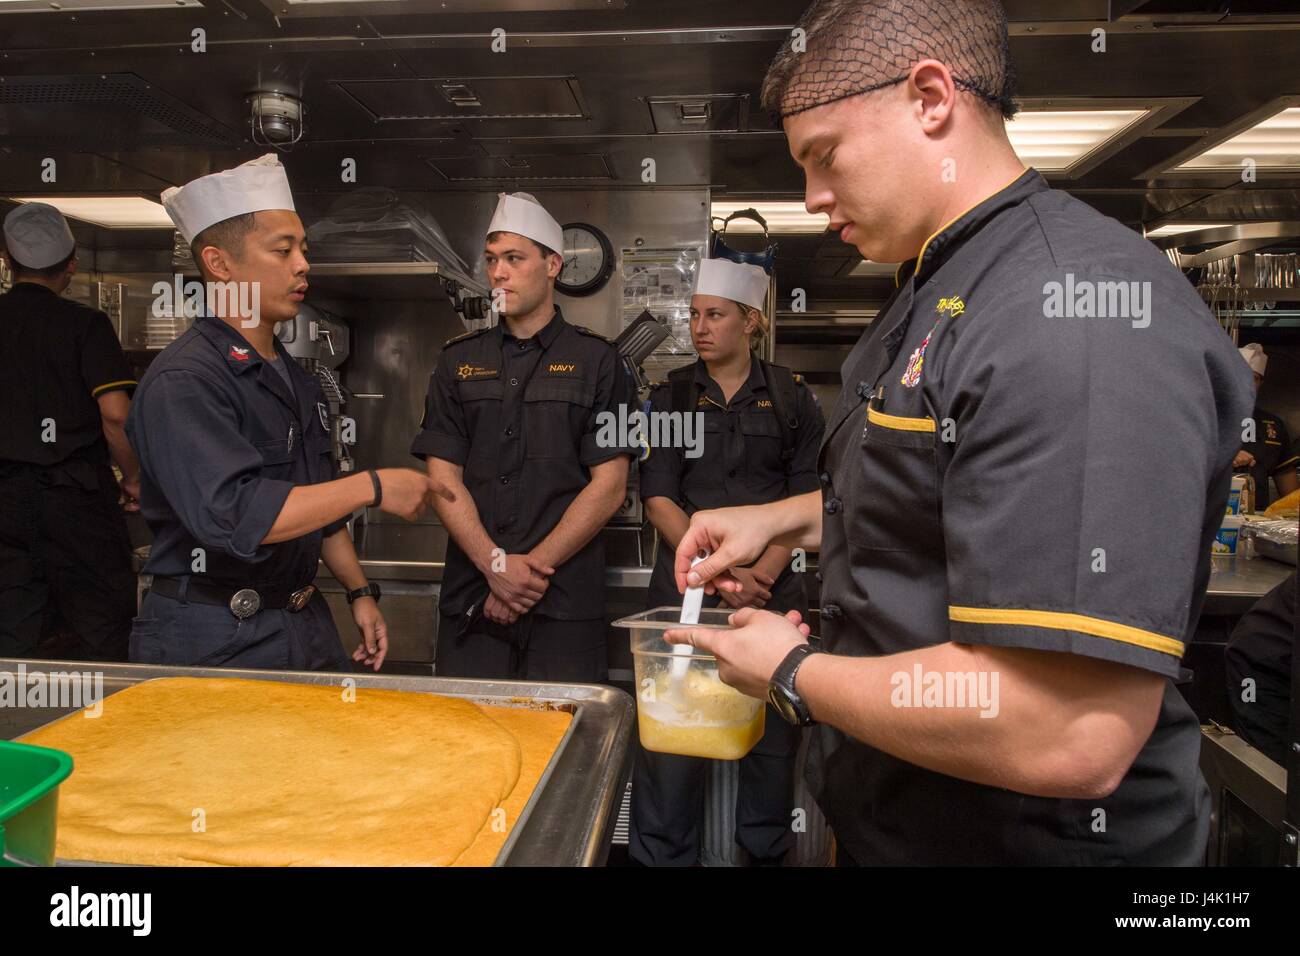 161113-N-DJ750-157 PACIFIC OCEAN (Nov. 13, 2016) – Sailors aboard Arleigh Burke-class guided-missile destroyer USS Sampson (DDG 102) give Royal New Zealand Navy sailors a tour of the enlisted galley. Sampson will report to U.S. Third Fleet, headquartered in San Diego, while deployed to the Western Pacific as part of the U.S. Pacific Fleet-led initiative to extend the command and control functions of Third Fleet into the region. (U.S. Navy photo by Petty Officer 2nd Class Bryan Jackson/Released) Stock Photo